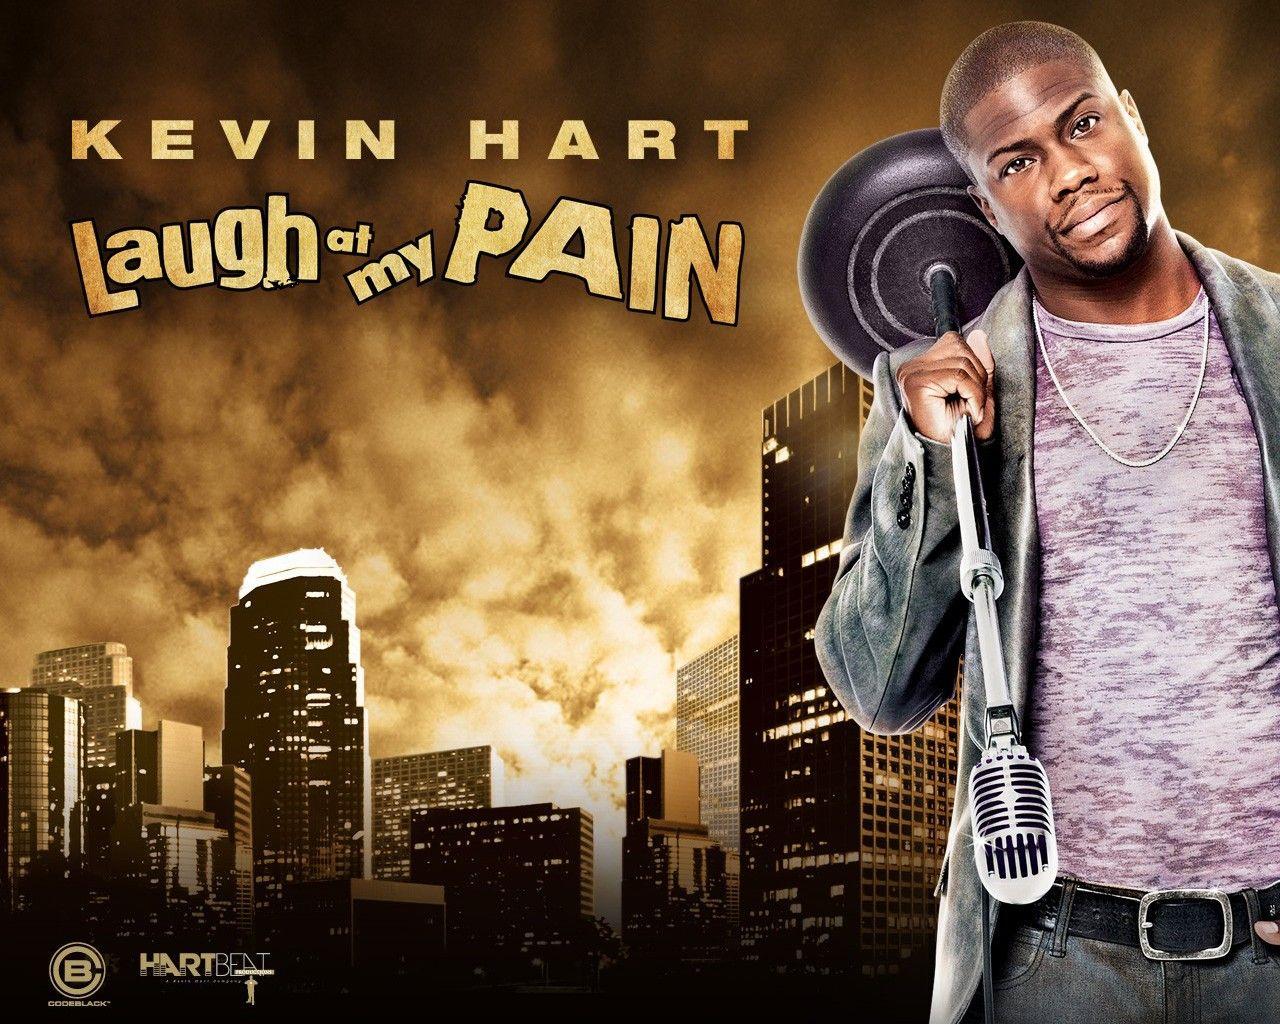 Beauty Kevin Hart Image. World's Greatest Art Site